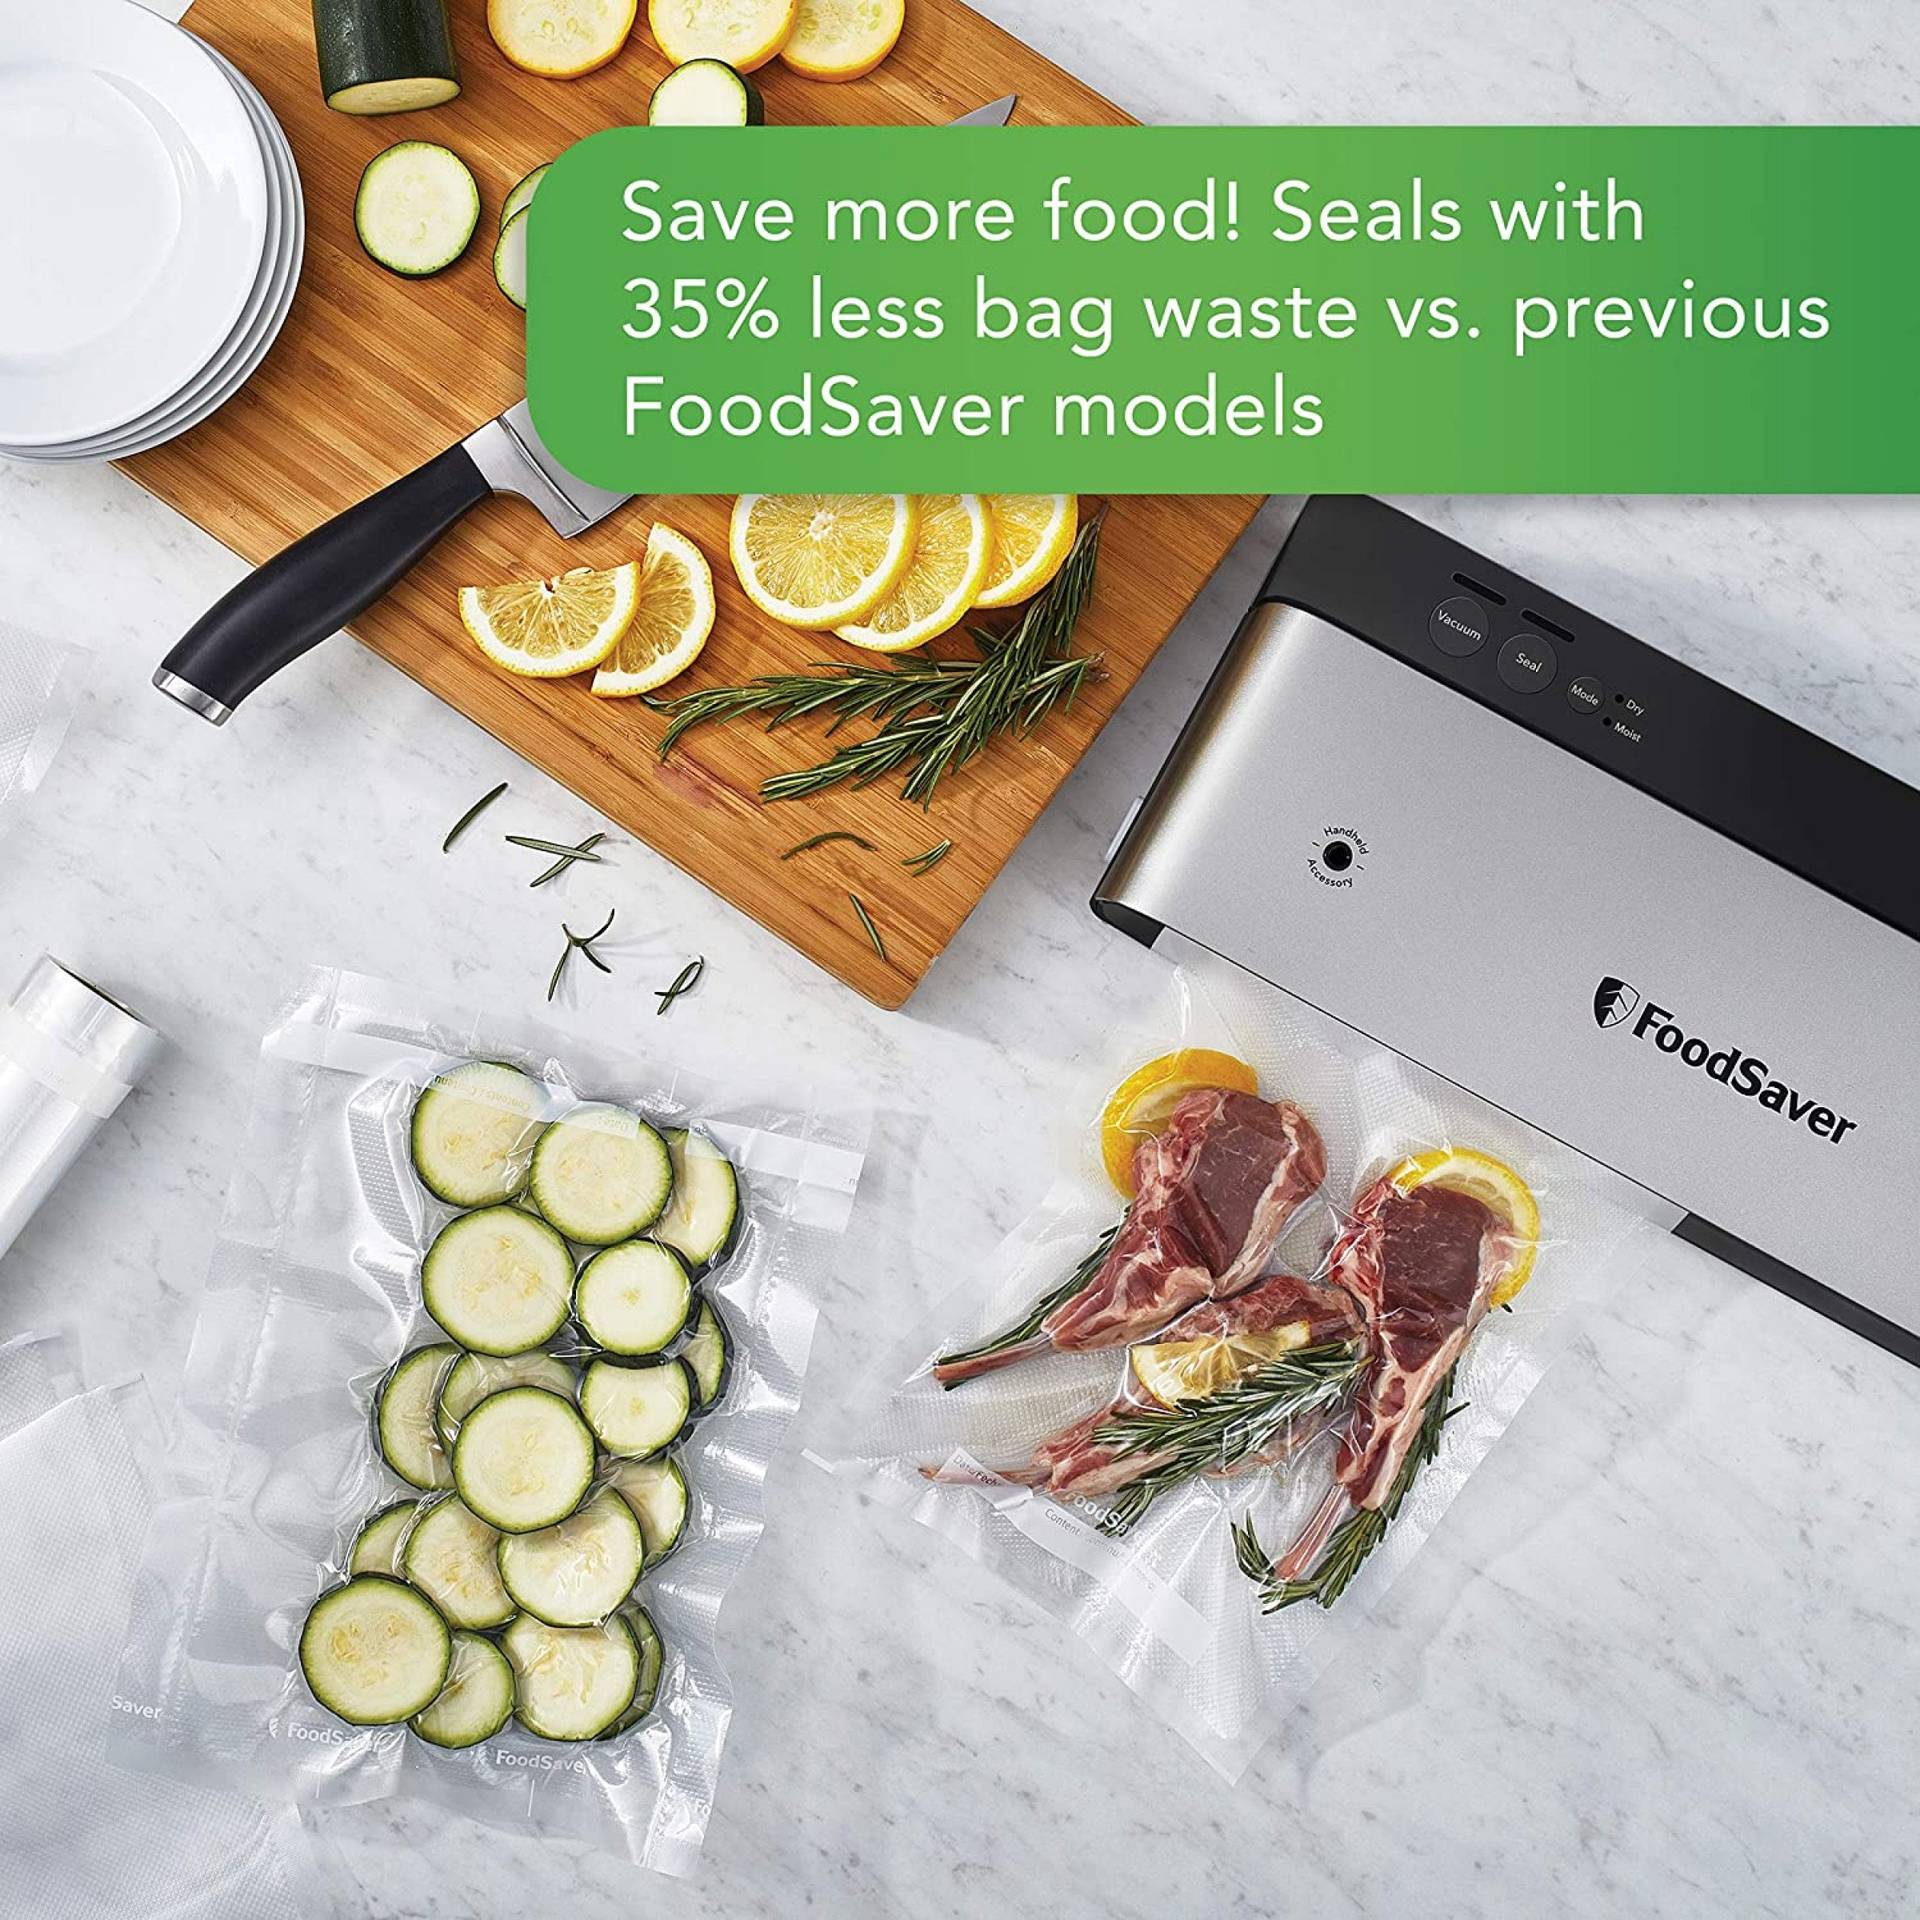 FoodSaver VS0150 powervac seals with 35 % less bag waste compared to previous FoodSaver models 